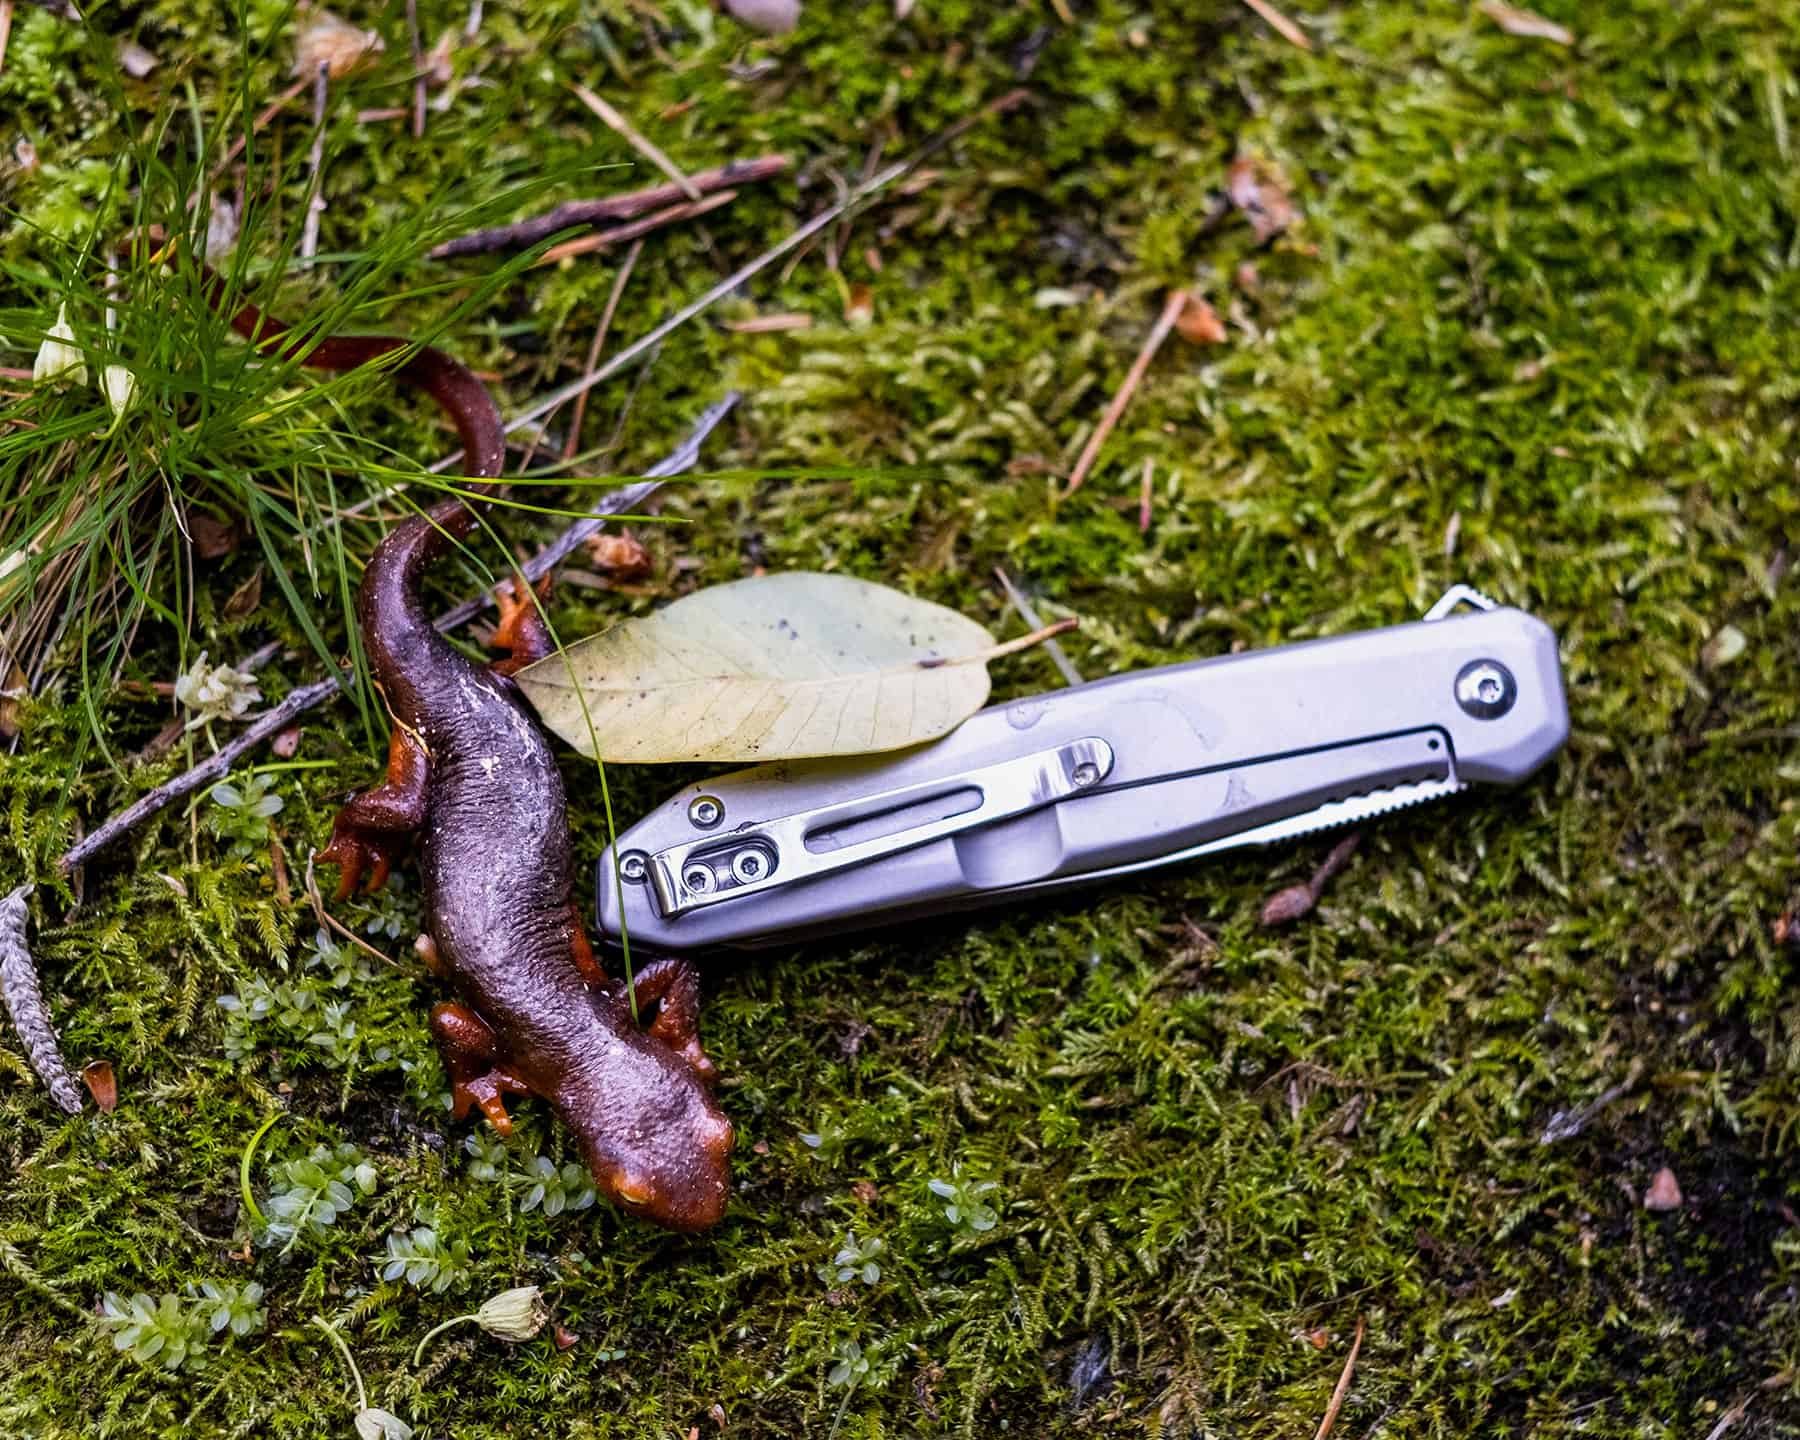 A California Newt crawling next to the CRKT Facet.